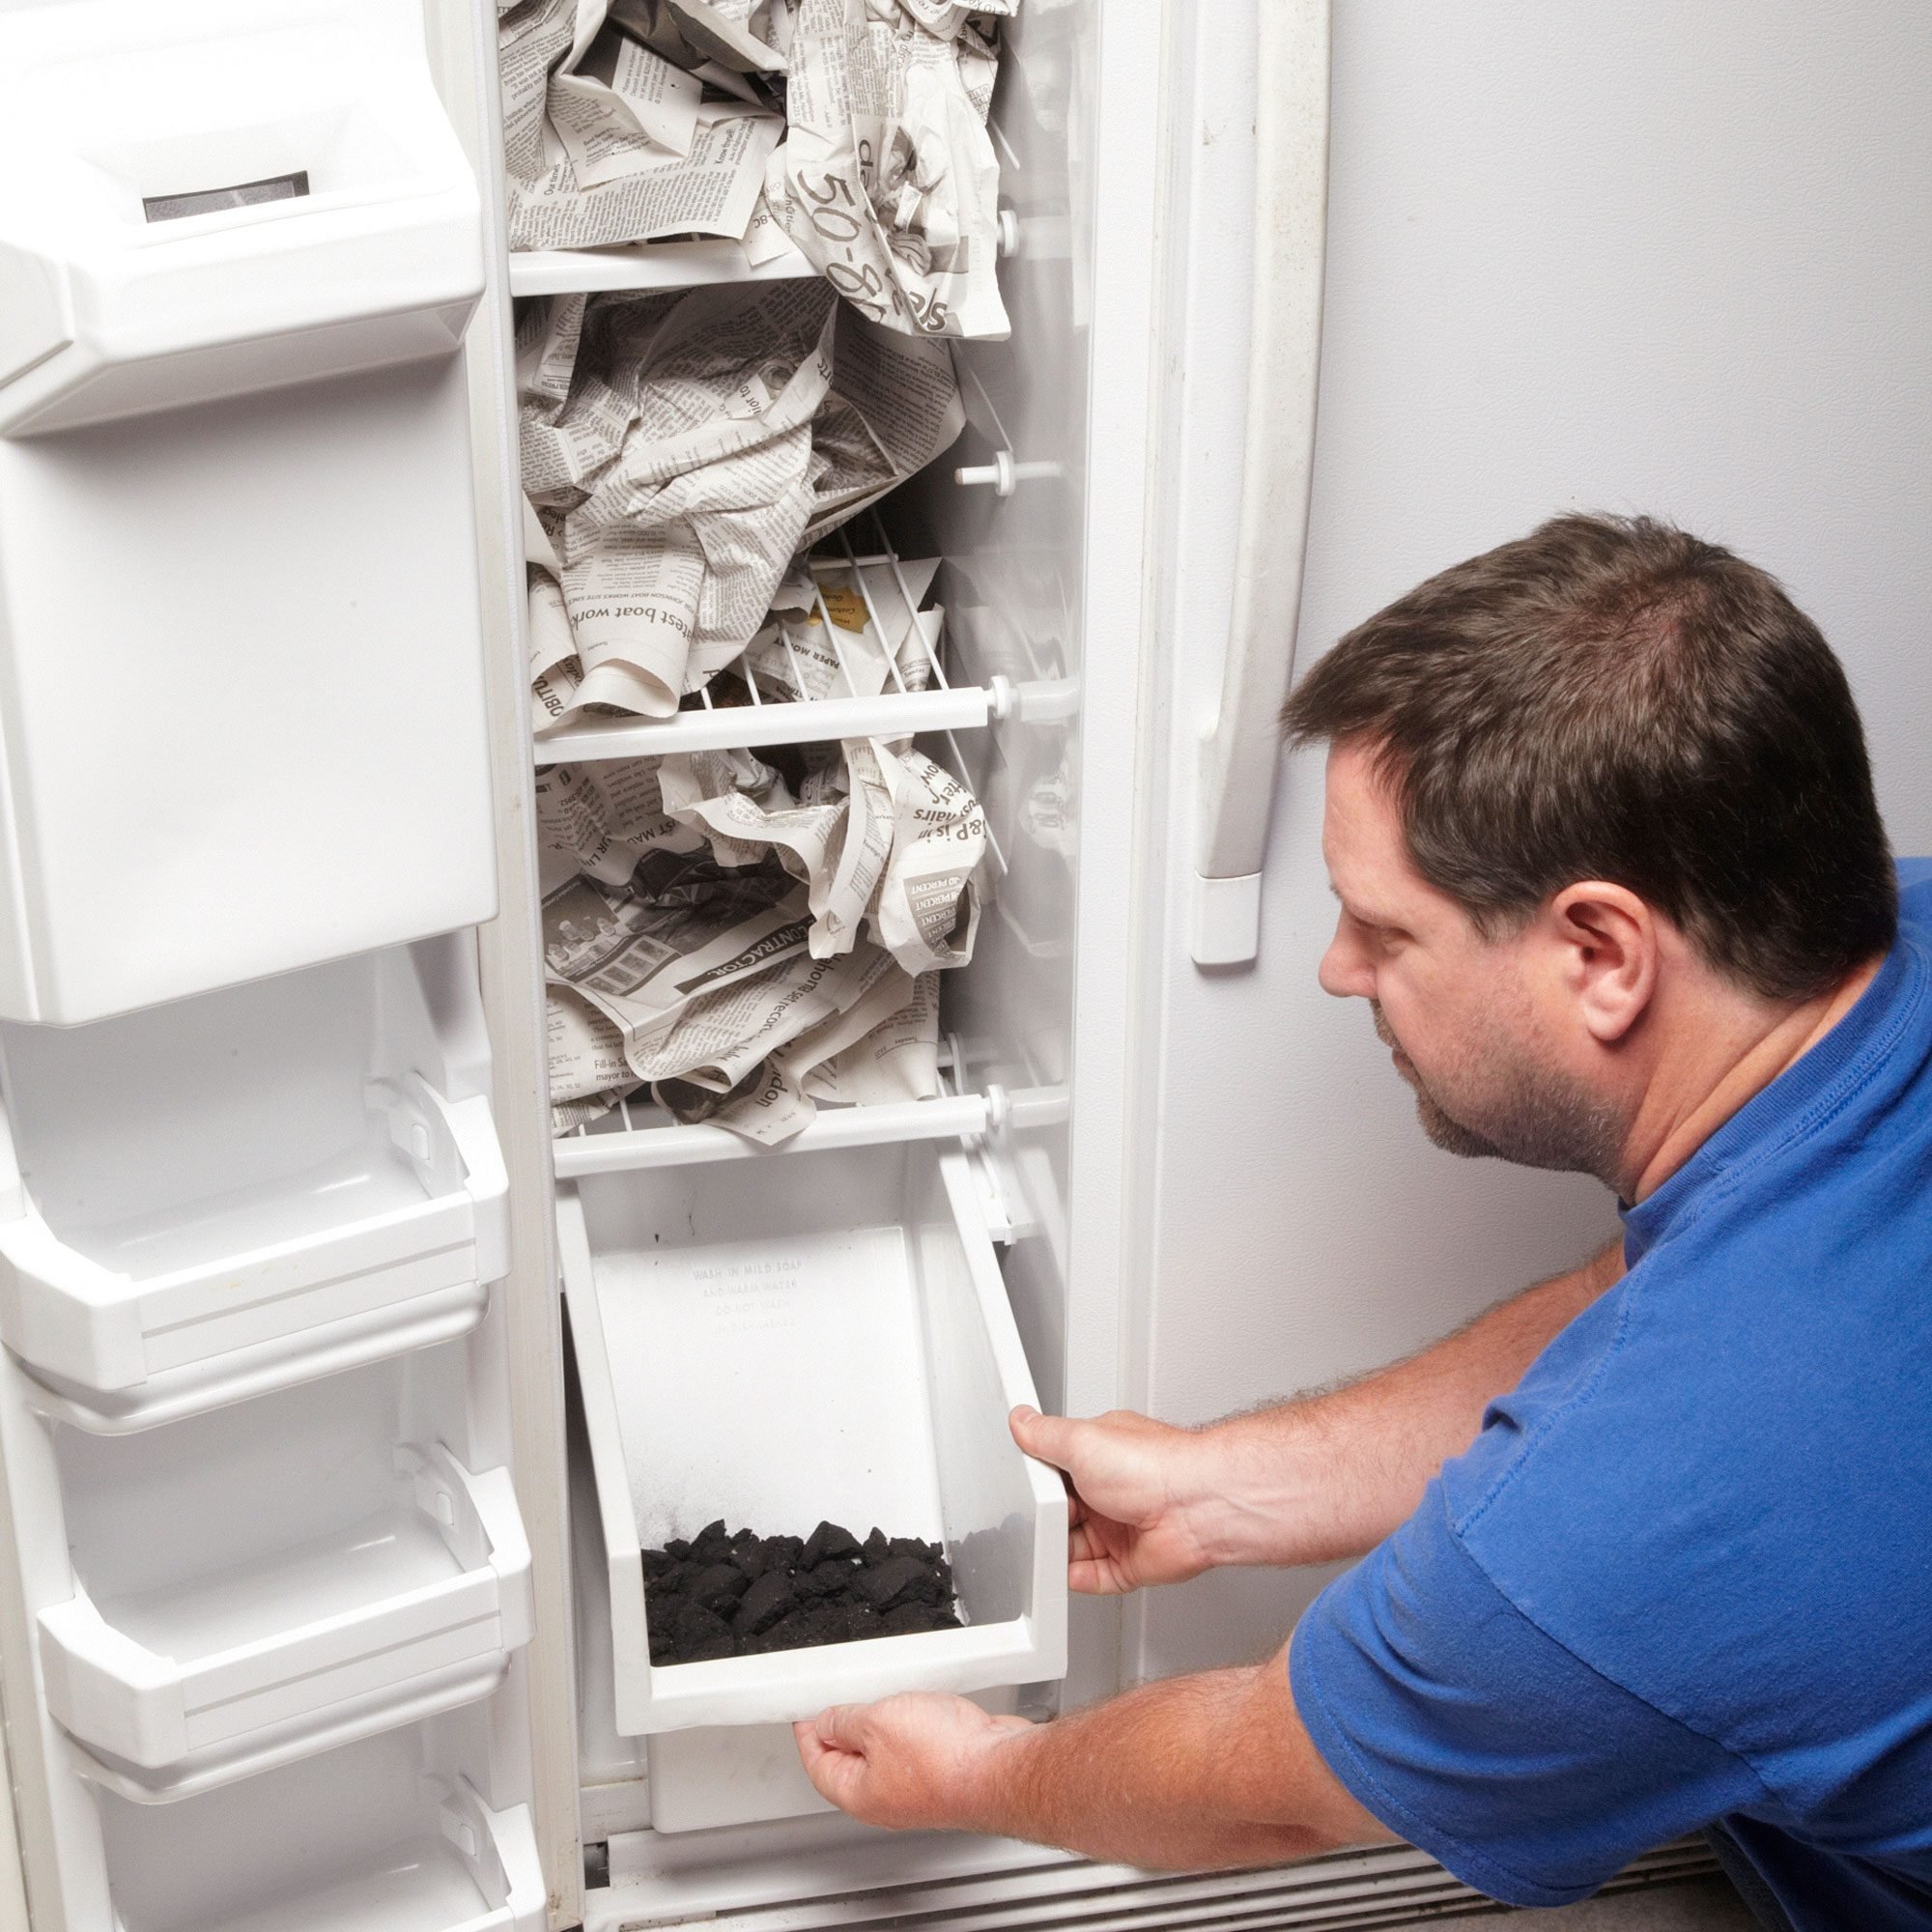 What To Do About A Stinky Refrigerator